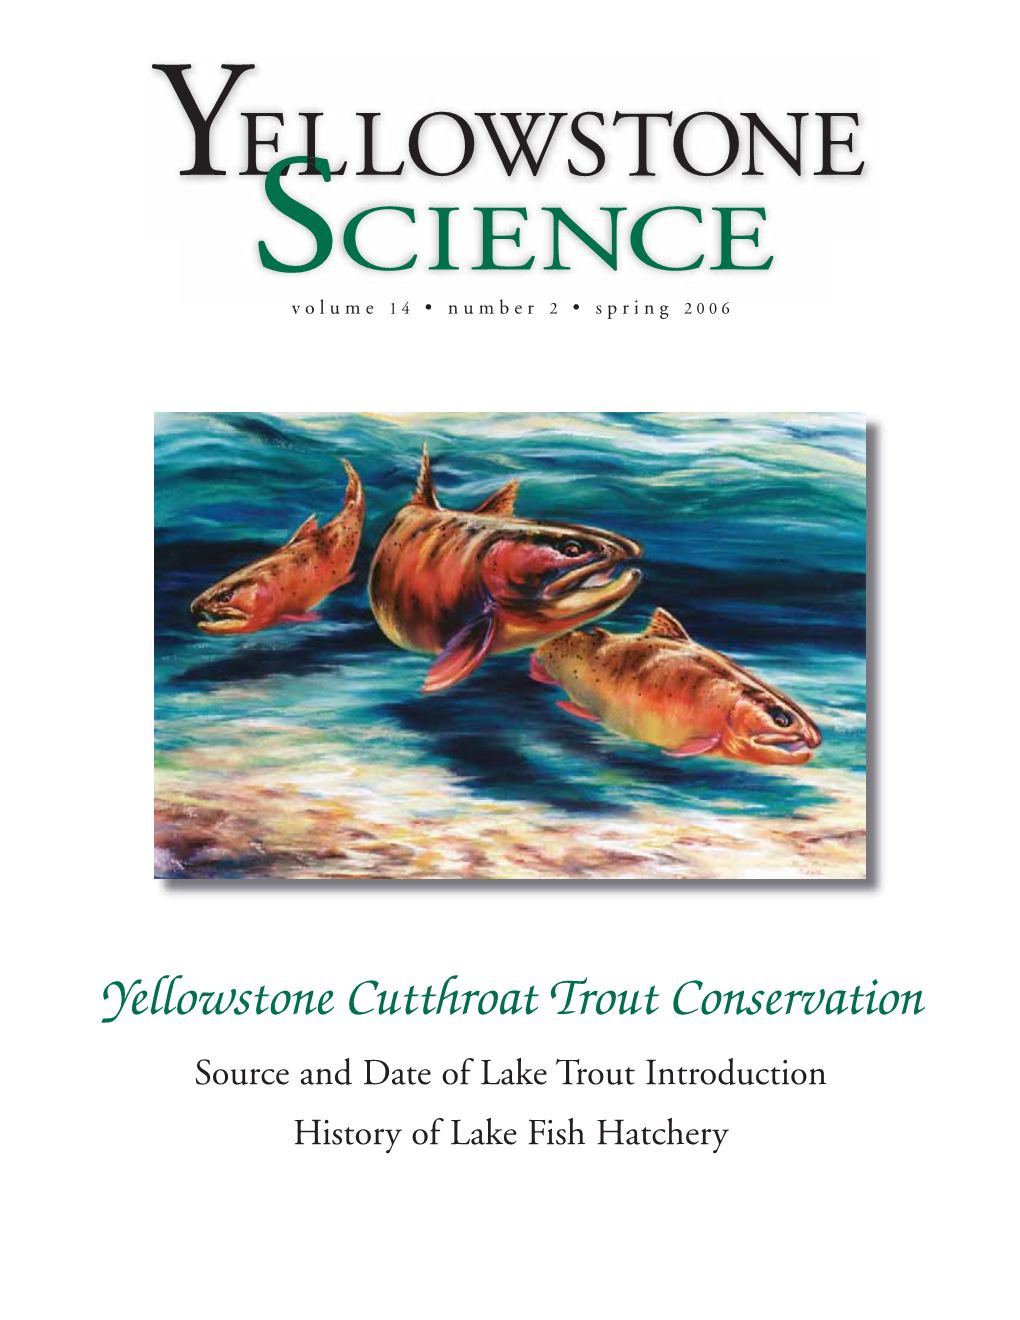 Yellowstone Cutthroat Trout Conservation Source and Date of Lake Trout Introduction History of Lake Fish Hatchery NPS/MIKE YOCHIMNPS/MIKE